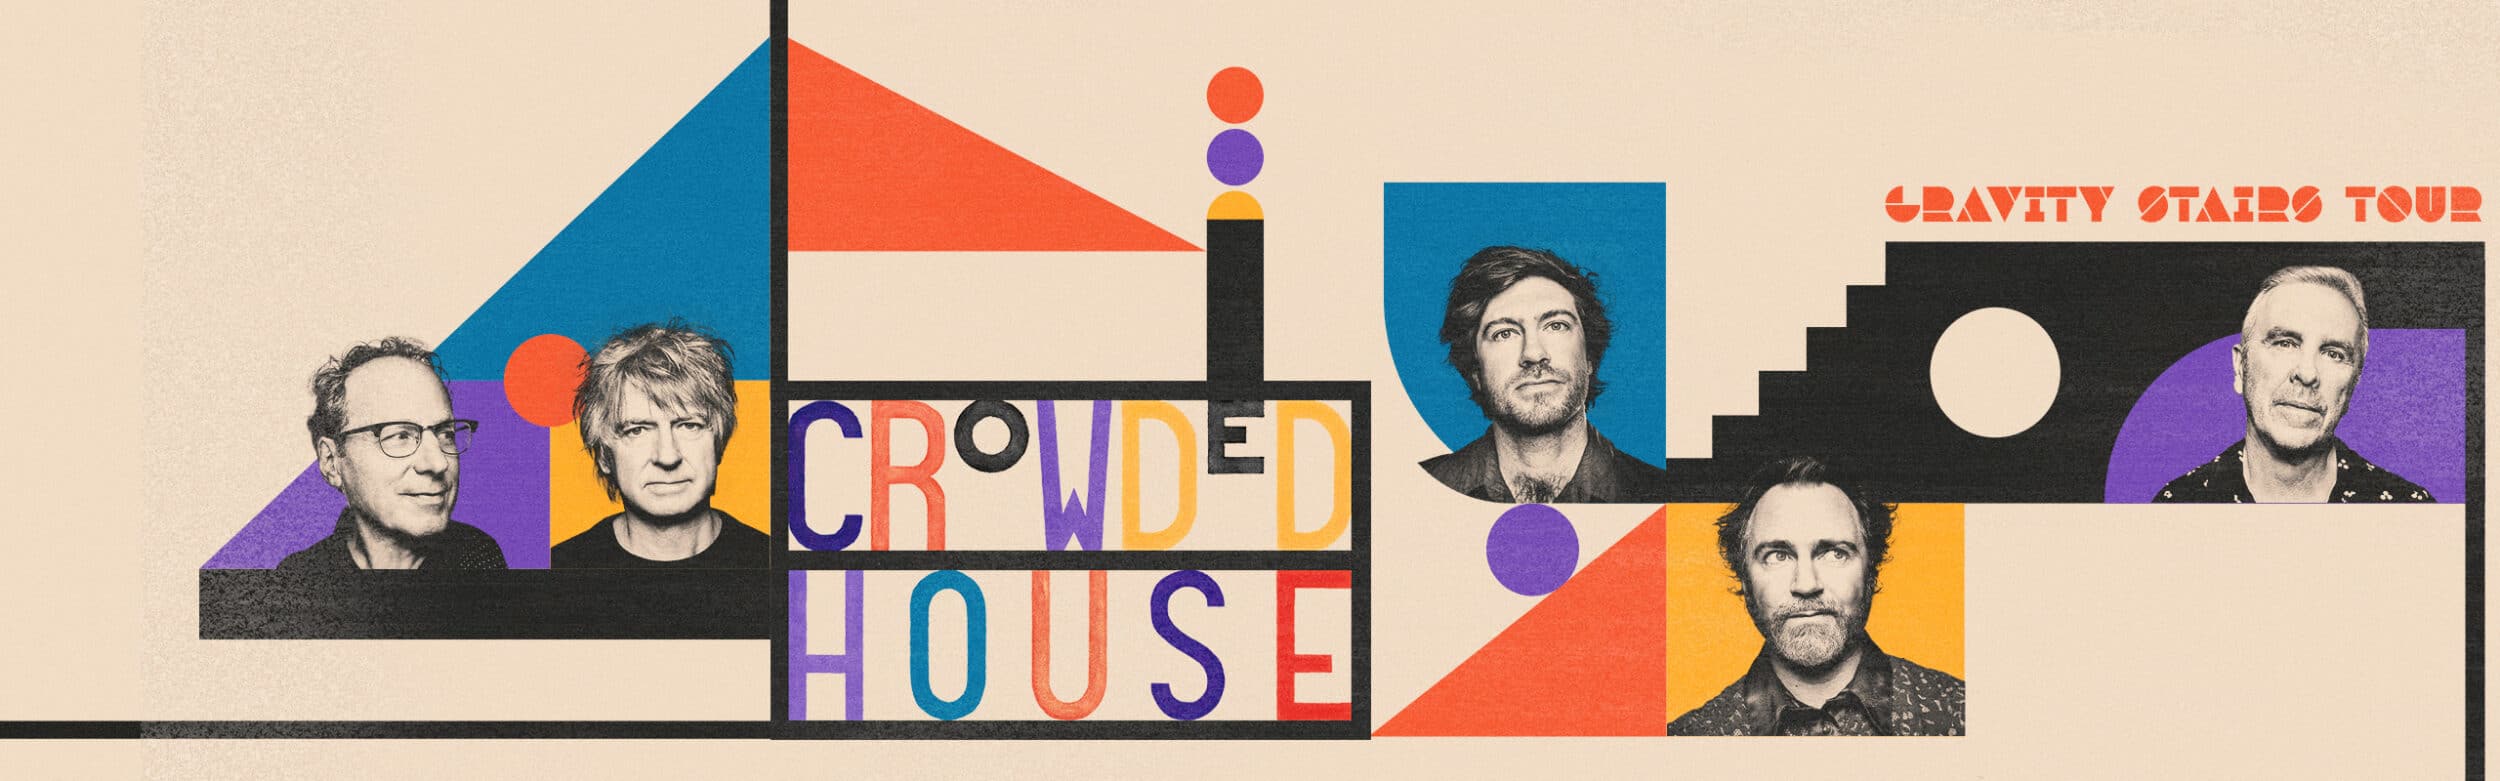 Crowded House – Gravity Stairs Tour